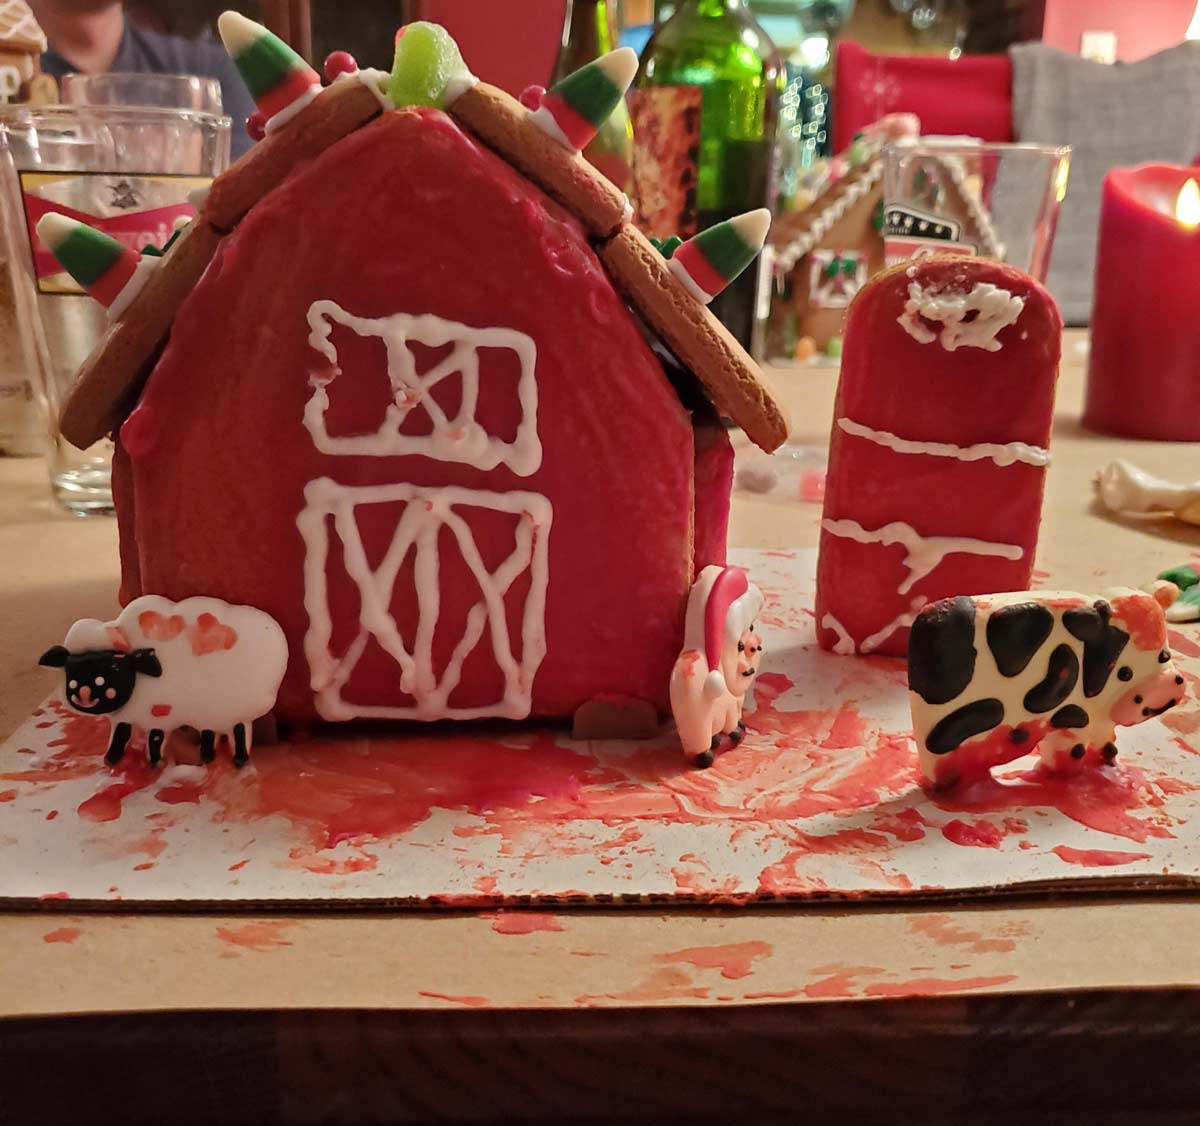 I really struggled with the icing for my gingerbread barn and it accidentally became a gingerbread slaughterhouse